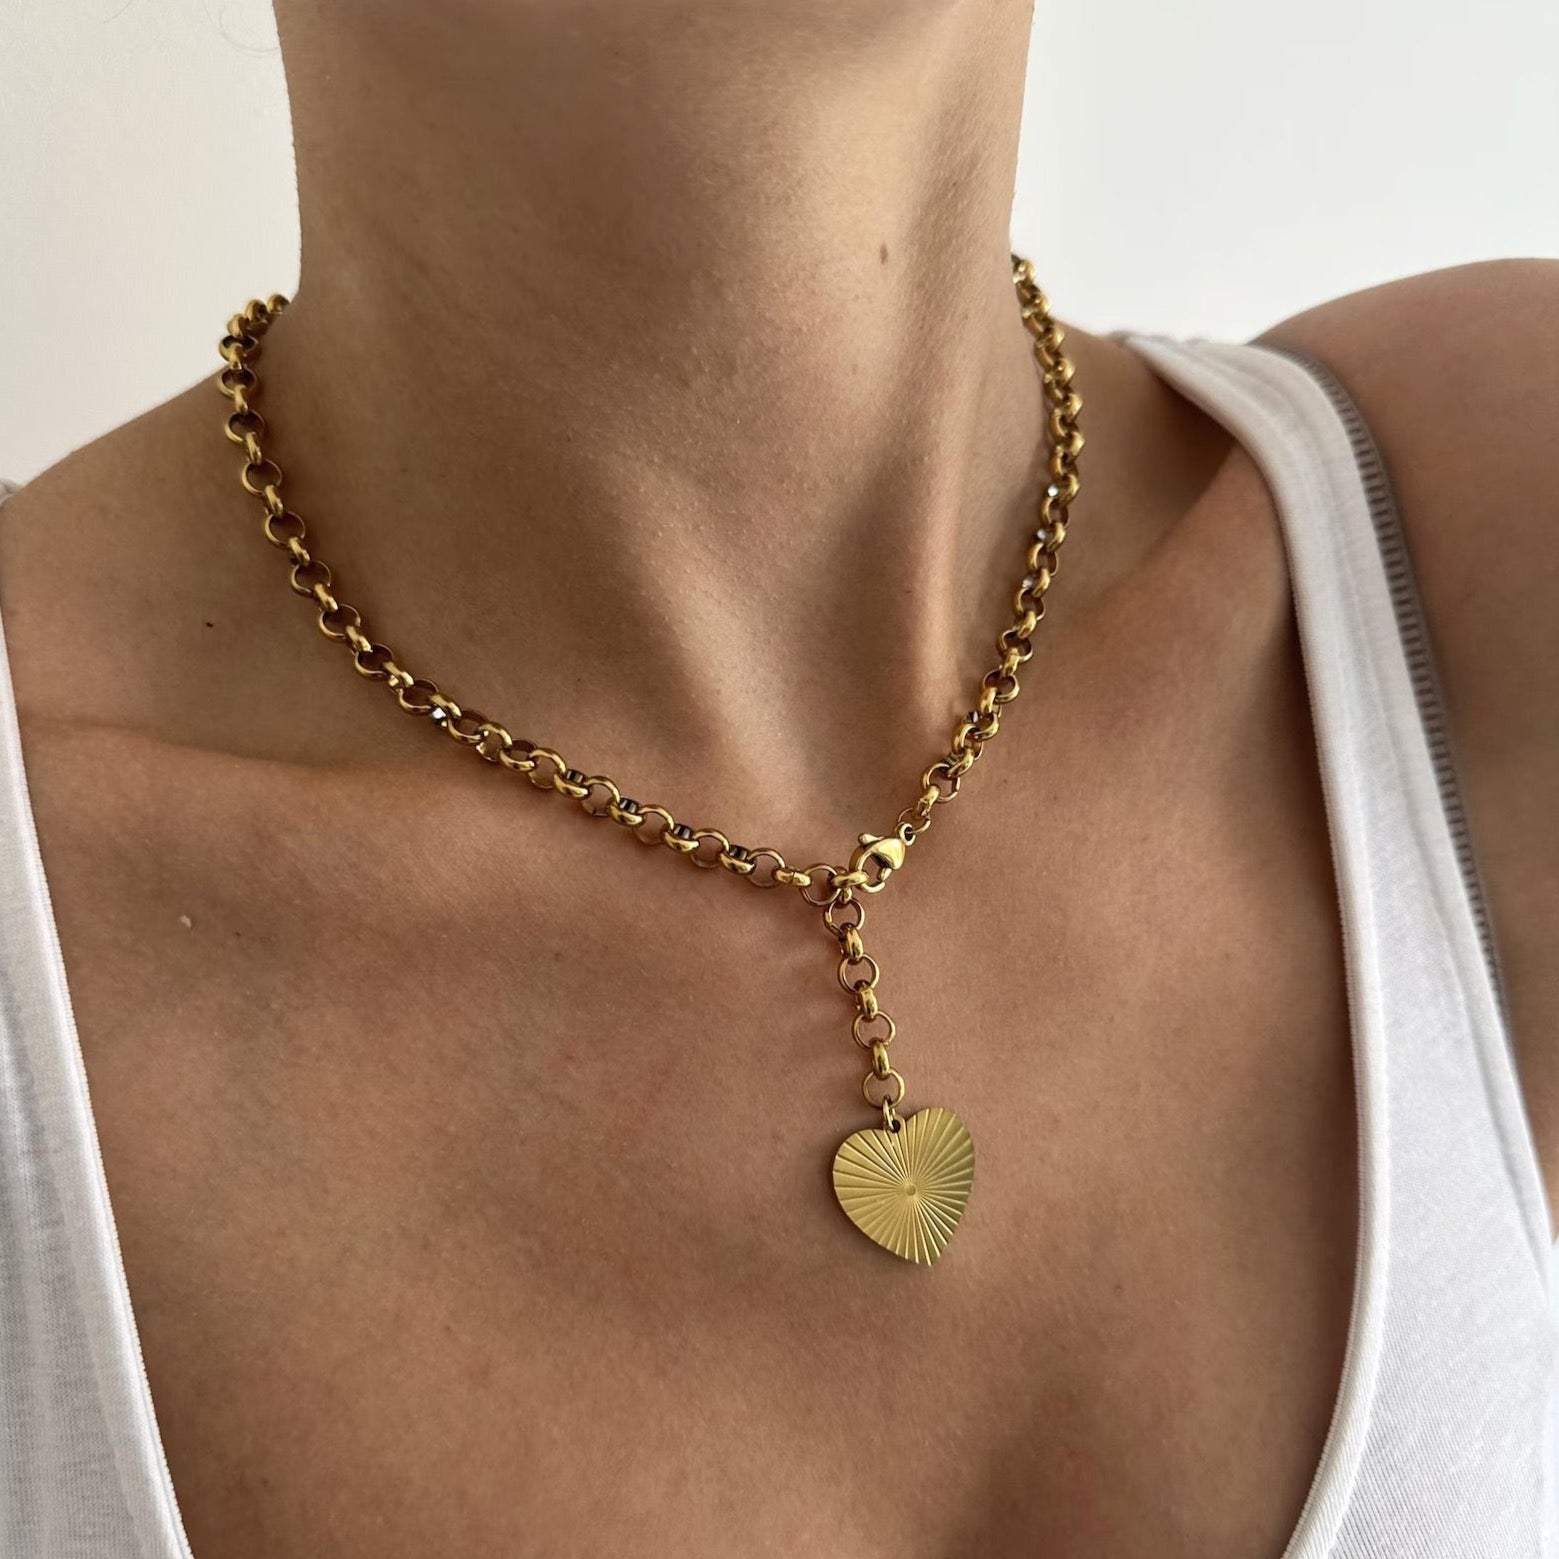 Golden heart necklace gleaming on a delicate chain